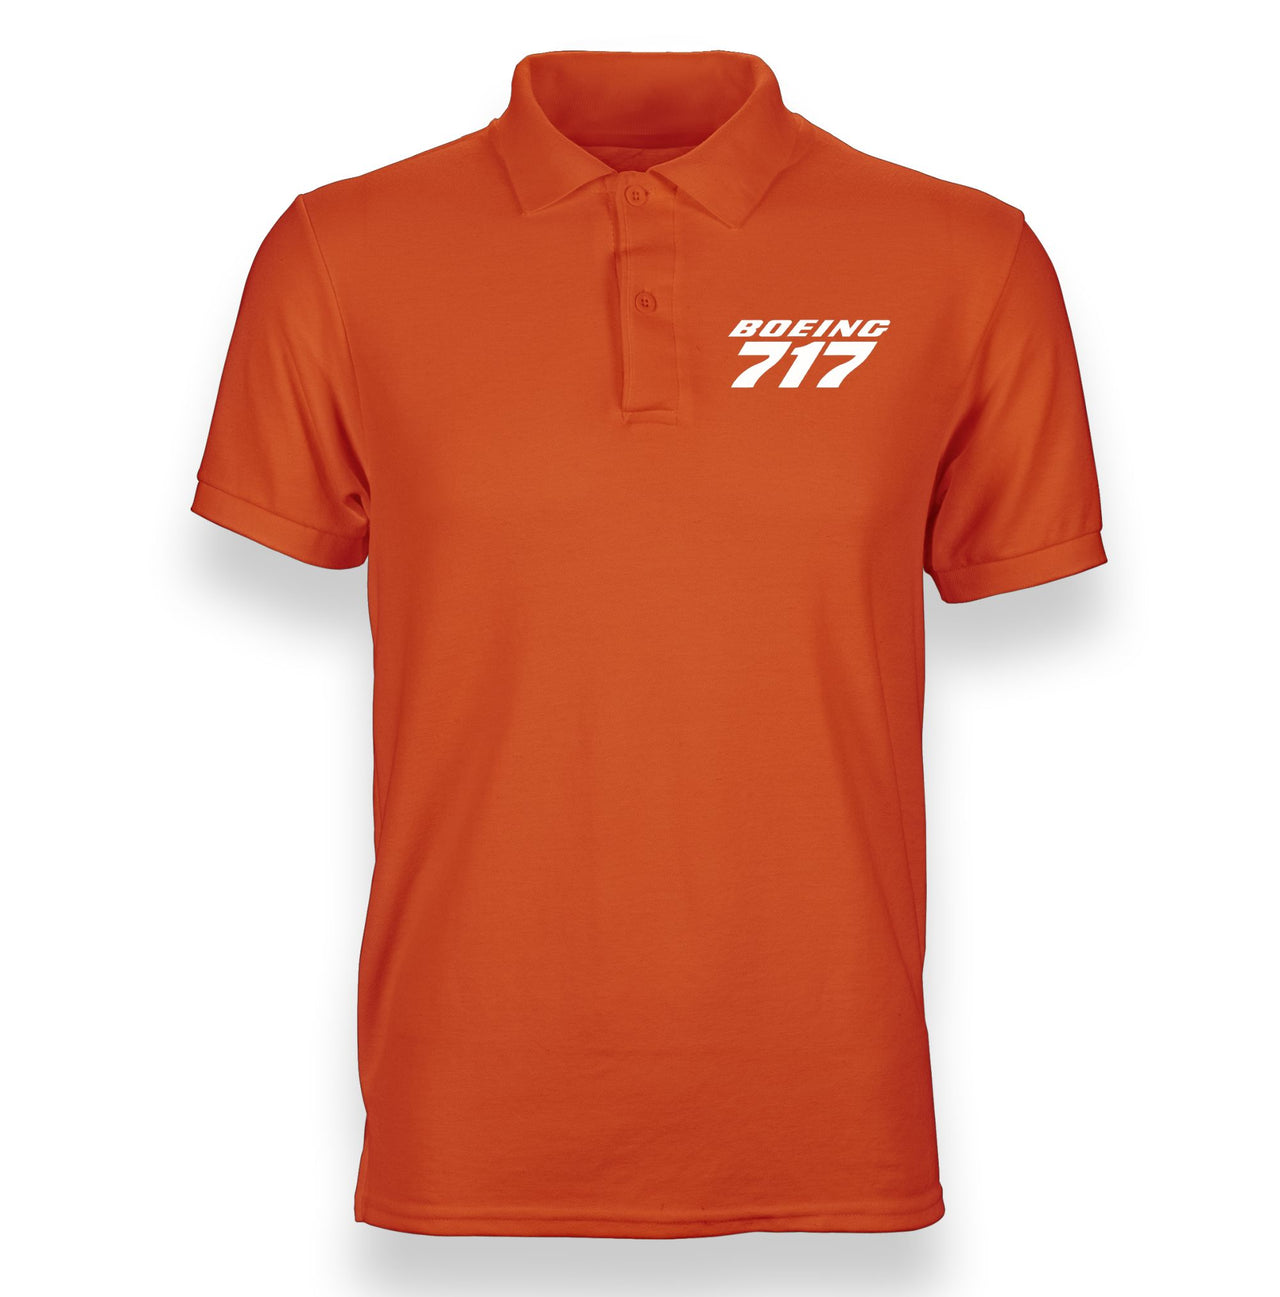 Boeing 717 & Text Designed "WOMEN" Polo T-Shirts